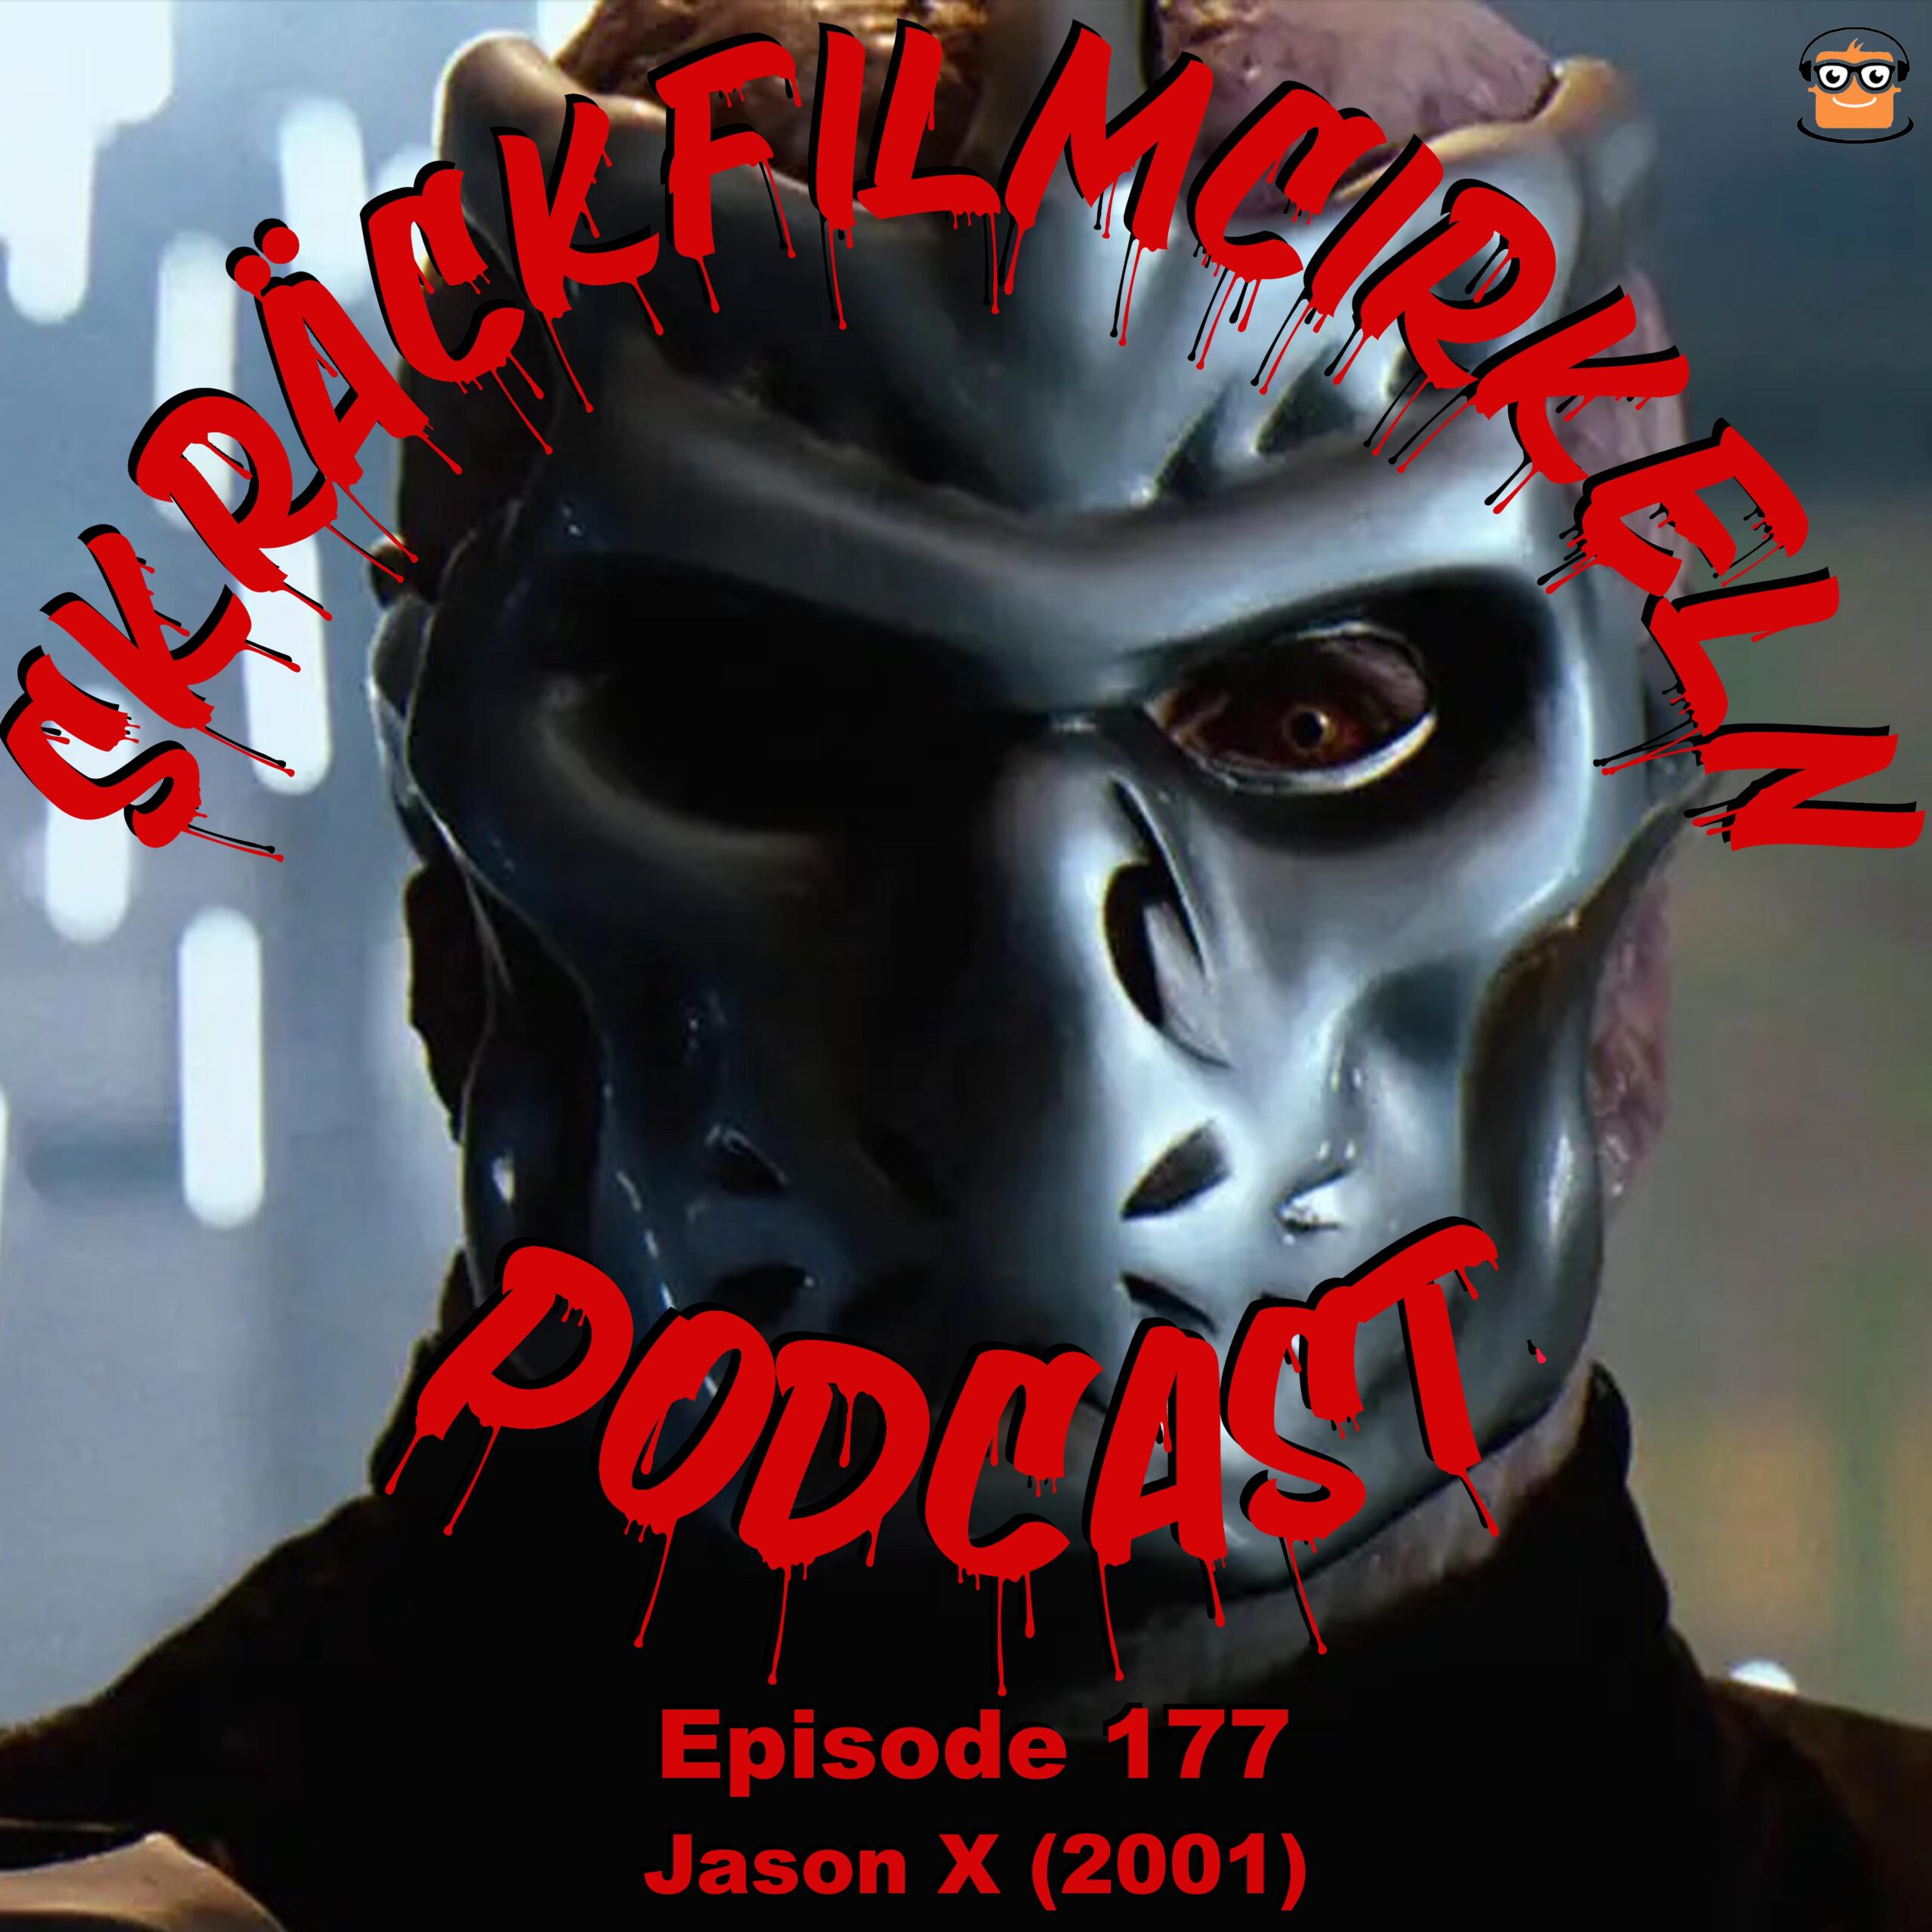 Episode 177 – Friday the 13th Part X: Jason X (2001)